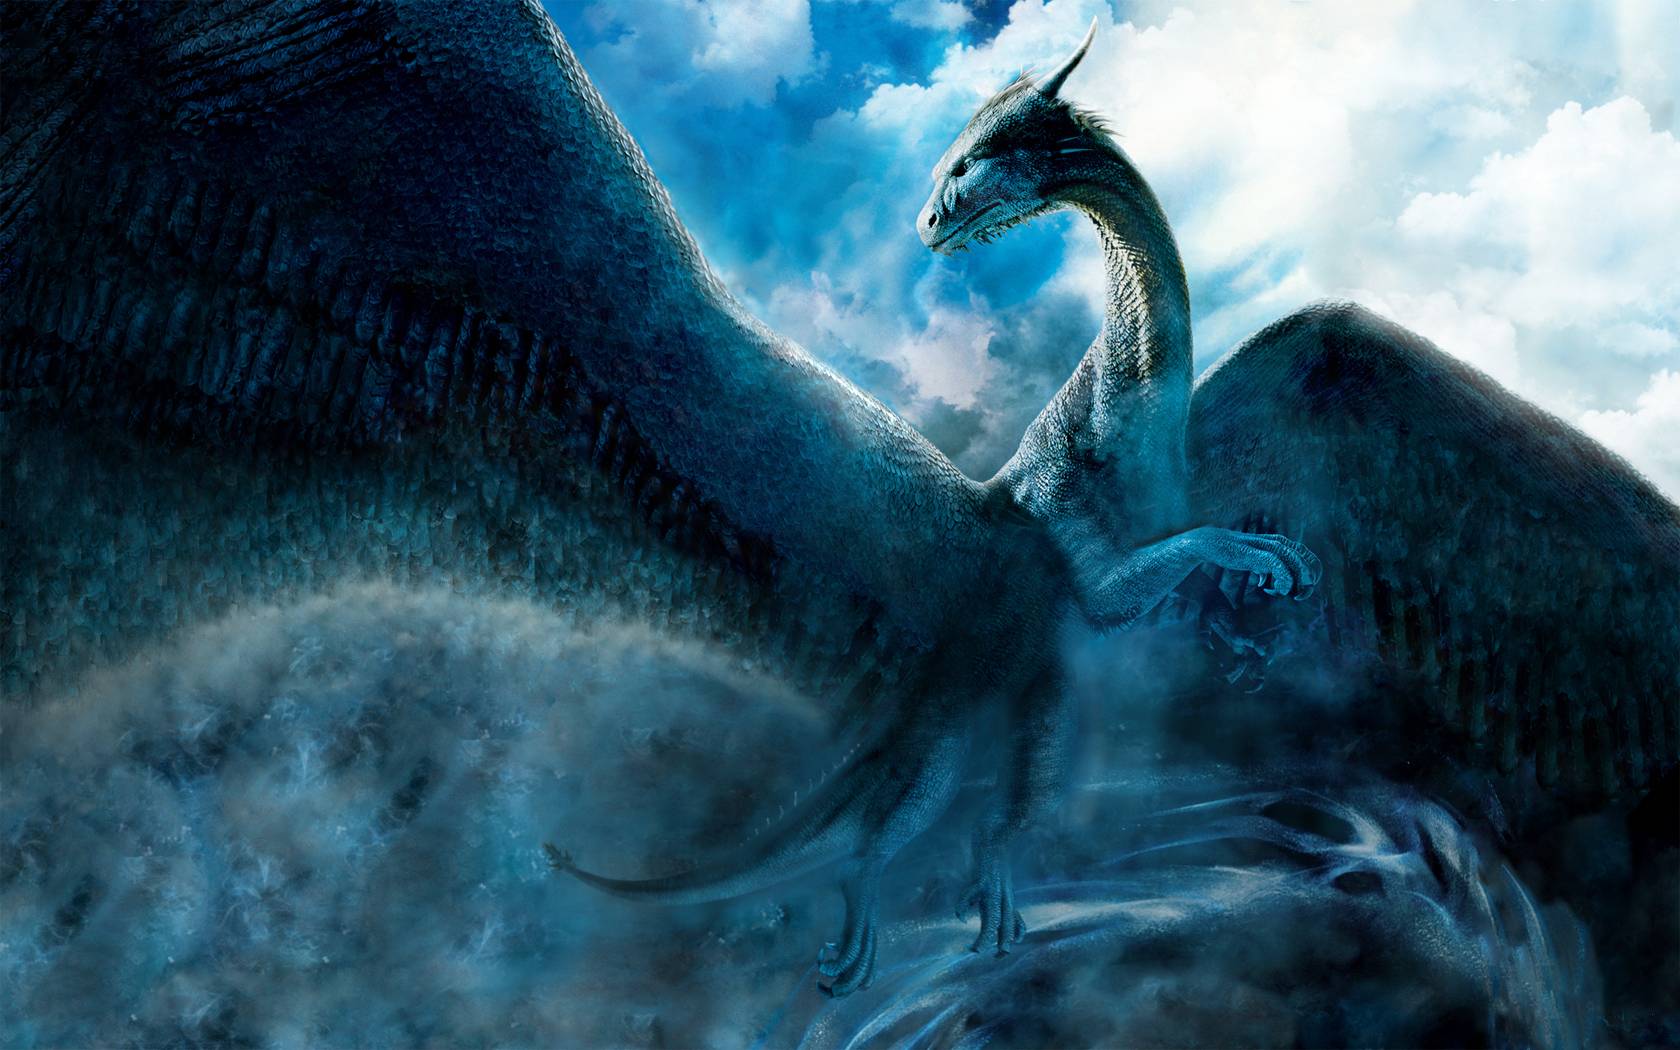 Ice Dragon Background Wallpapers 10174 - Amazing Wallpaperz